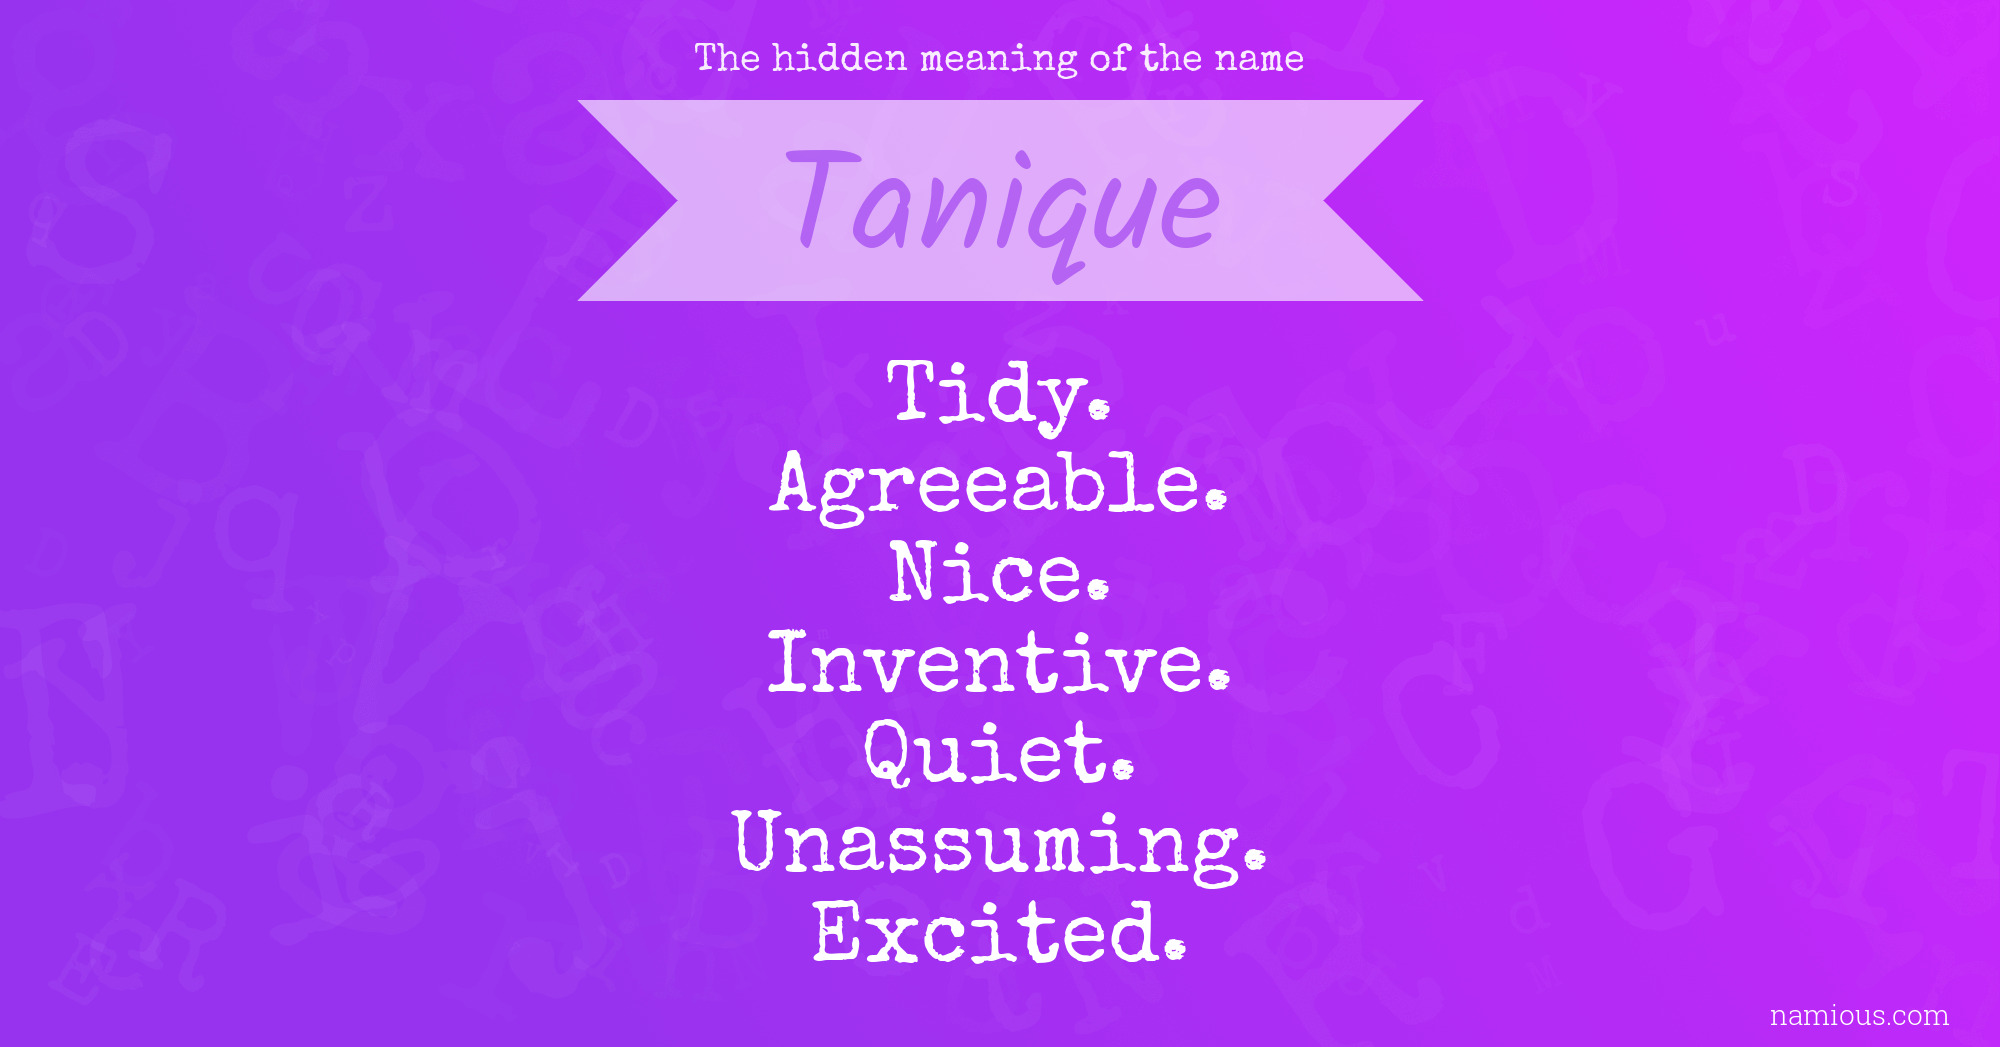 The hidden meaning of the name Tanique